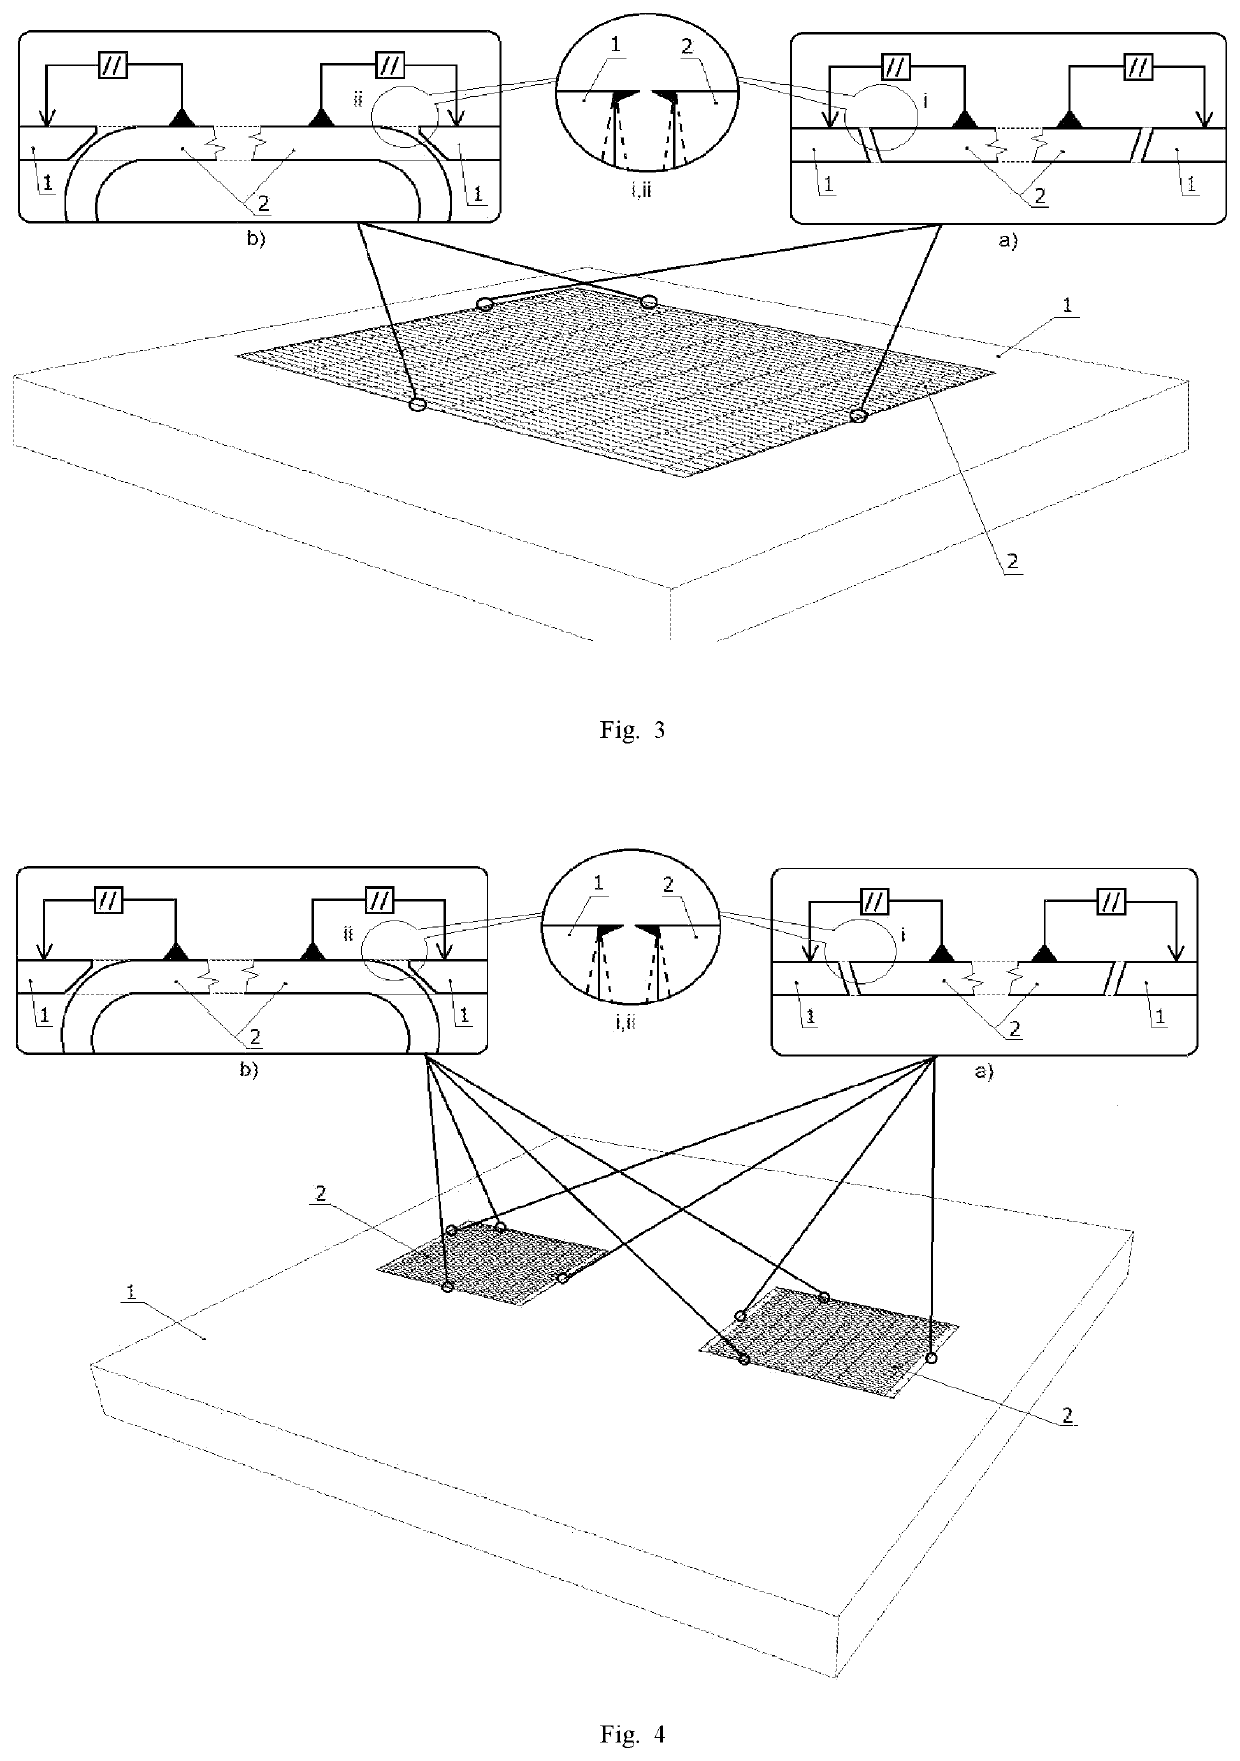 An integrated multi-purpose hockey skatemill and its control/management in the individual training and testing of the skating and hockey skills